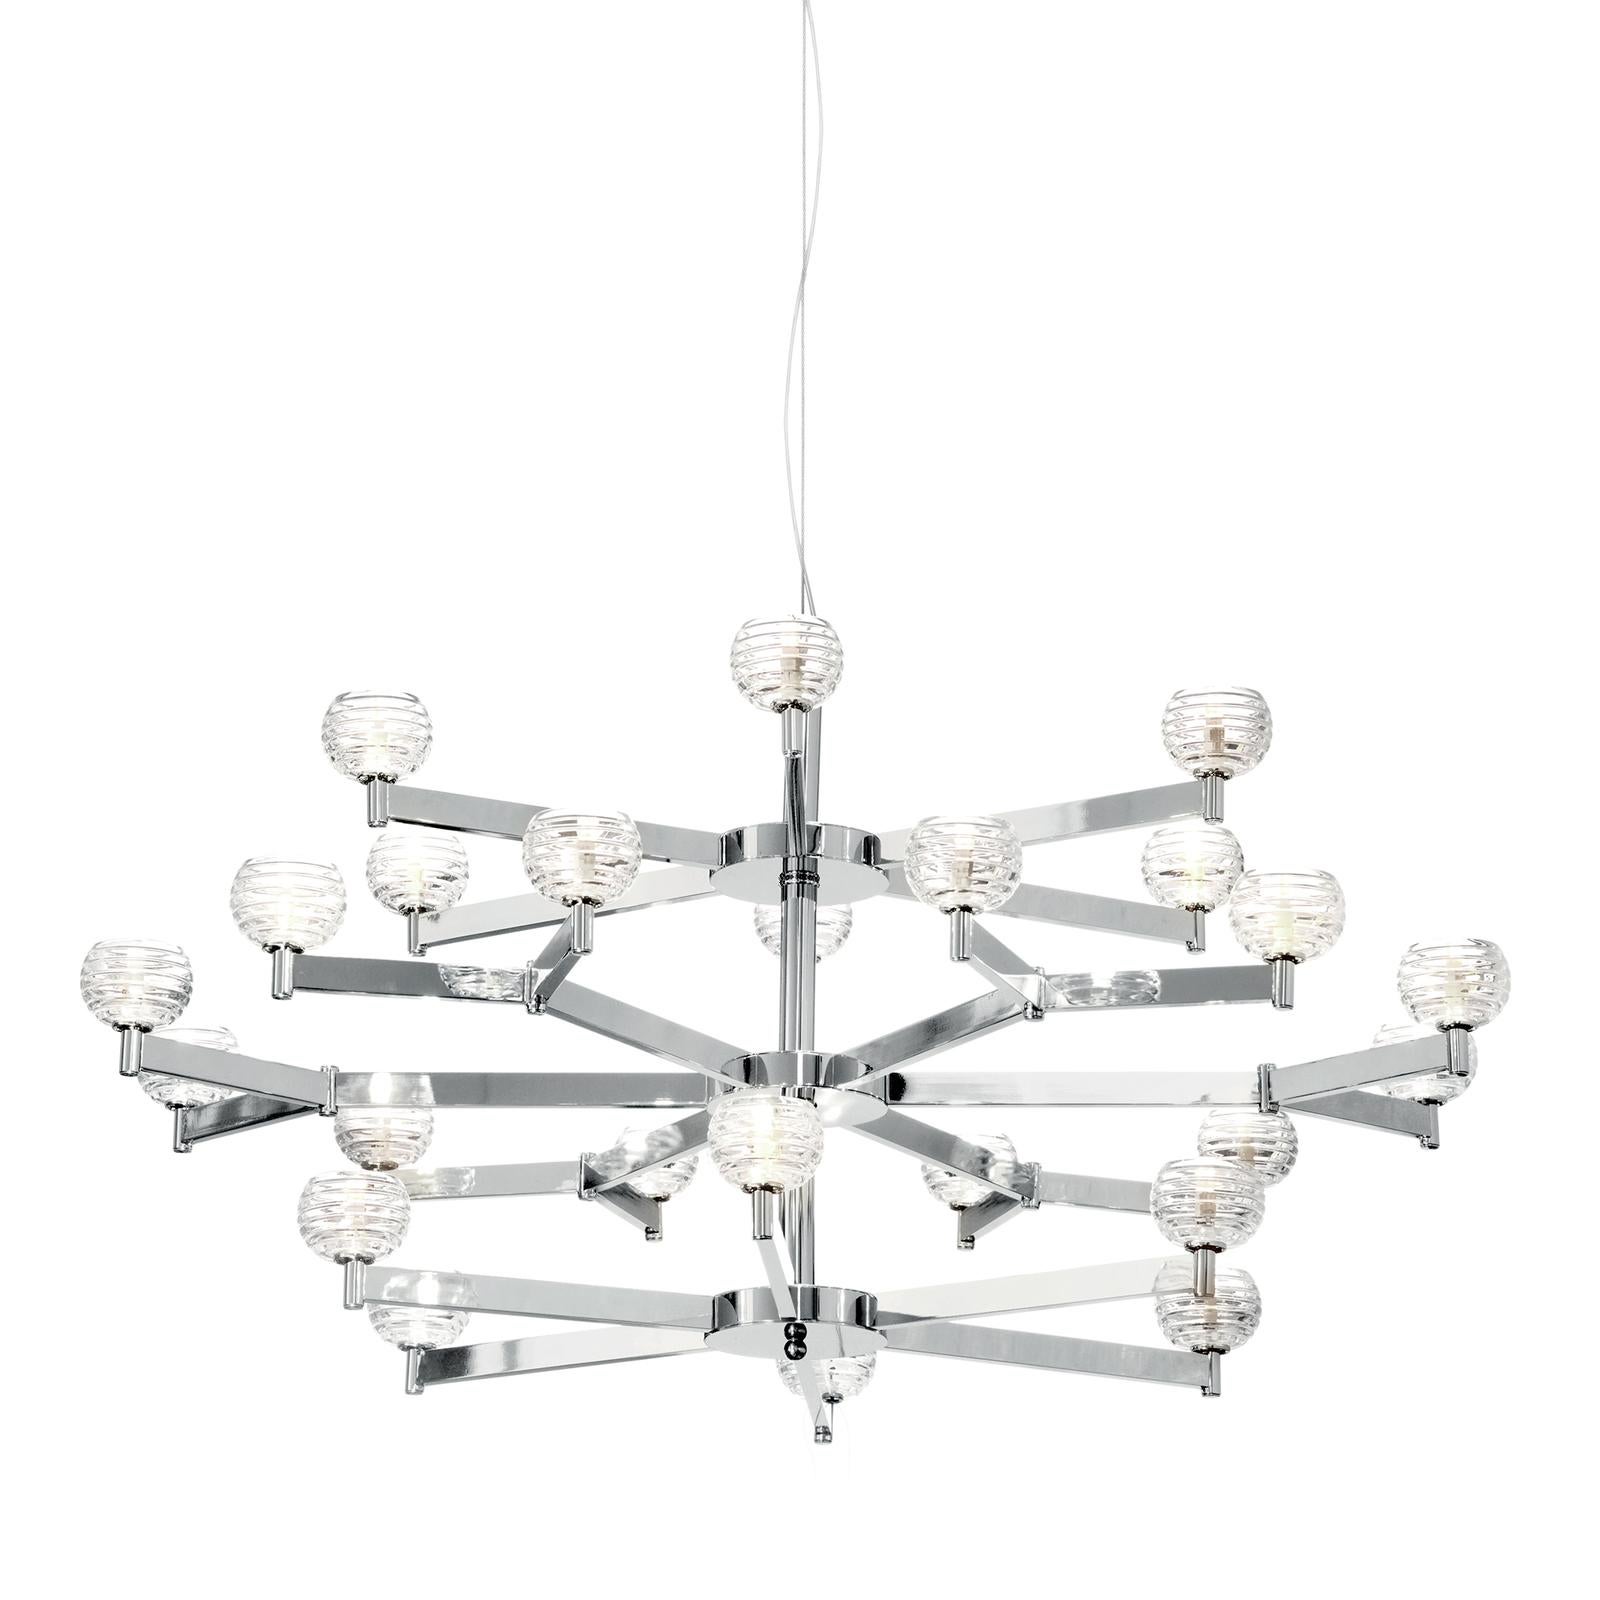 Inspired by the world of nature and reinterpreted using rigorous geometries, this chandelier is a homage to the stylish and bold Art Deco home decor. Sophisticated and timeless, this piece will make a statement in a modern home, where it will